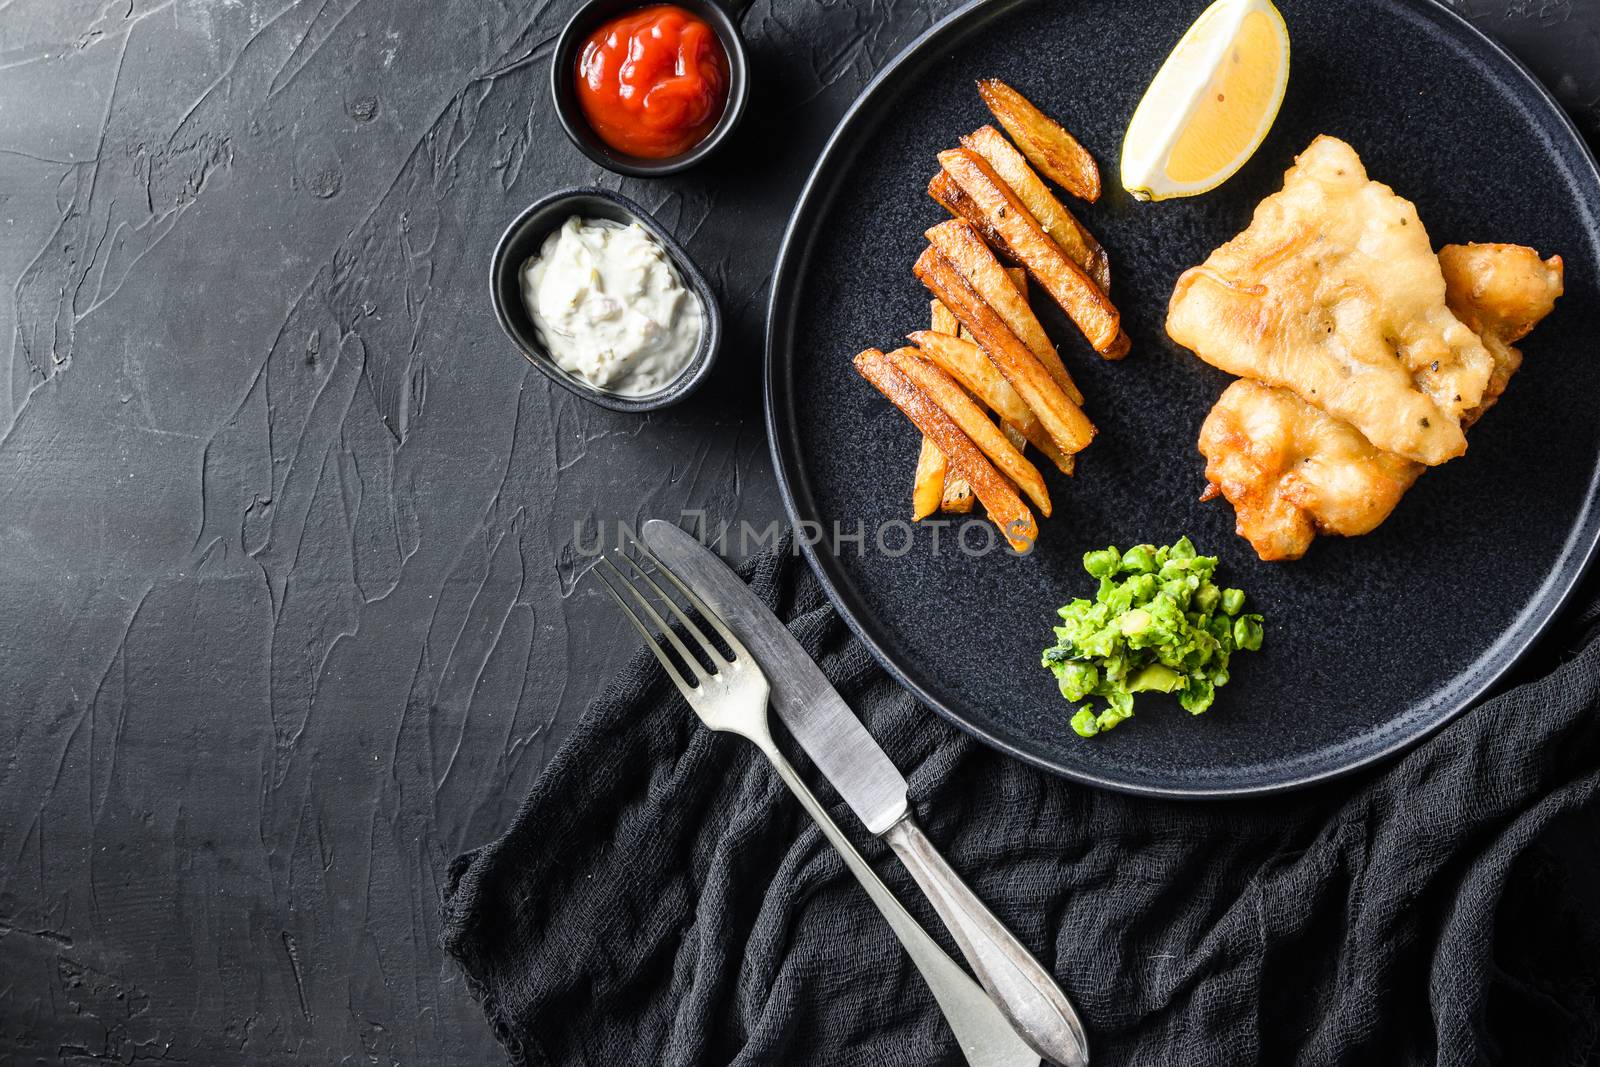 Fish chips with dip and lemon - fried cod, french fries, lemon slices, tartar sauce, ketchup tomatoe and mushy peas with fork and knife on black plate over black background top view space for text.